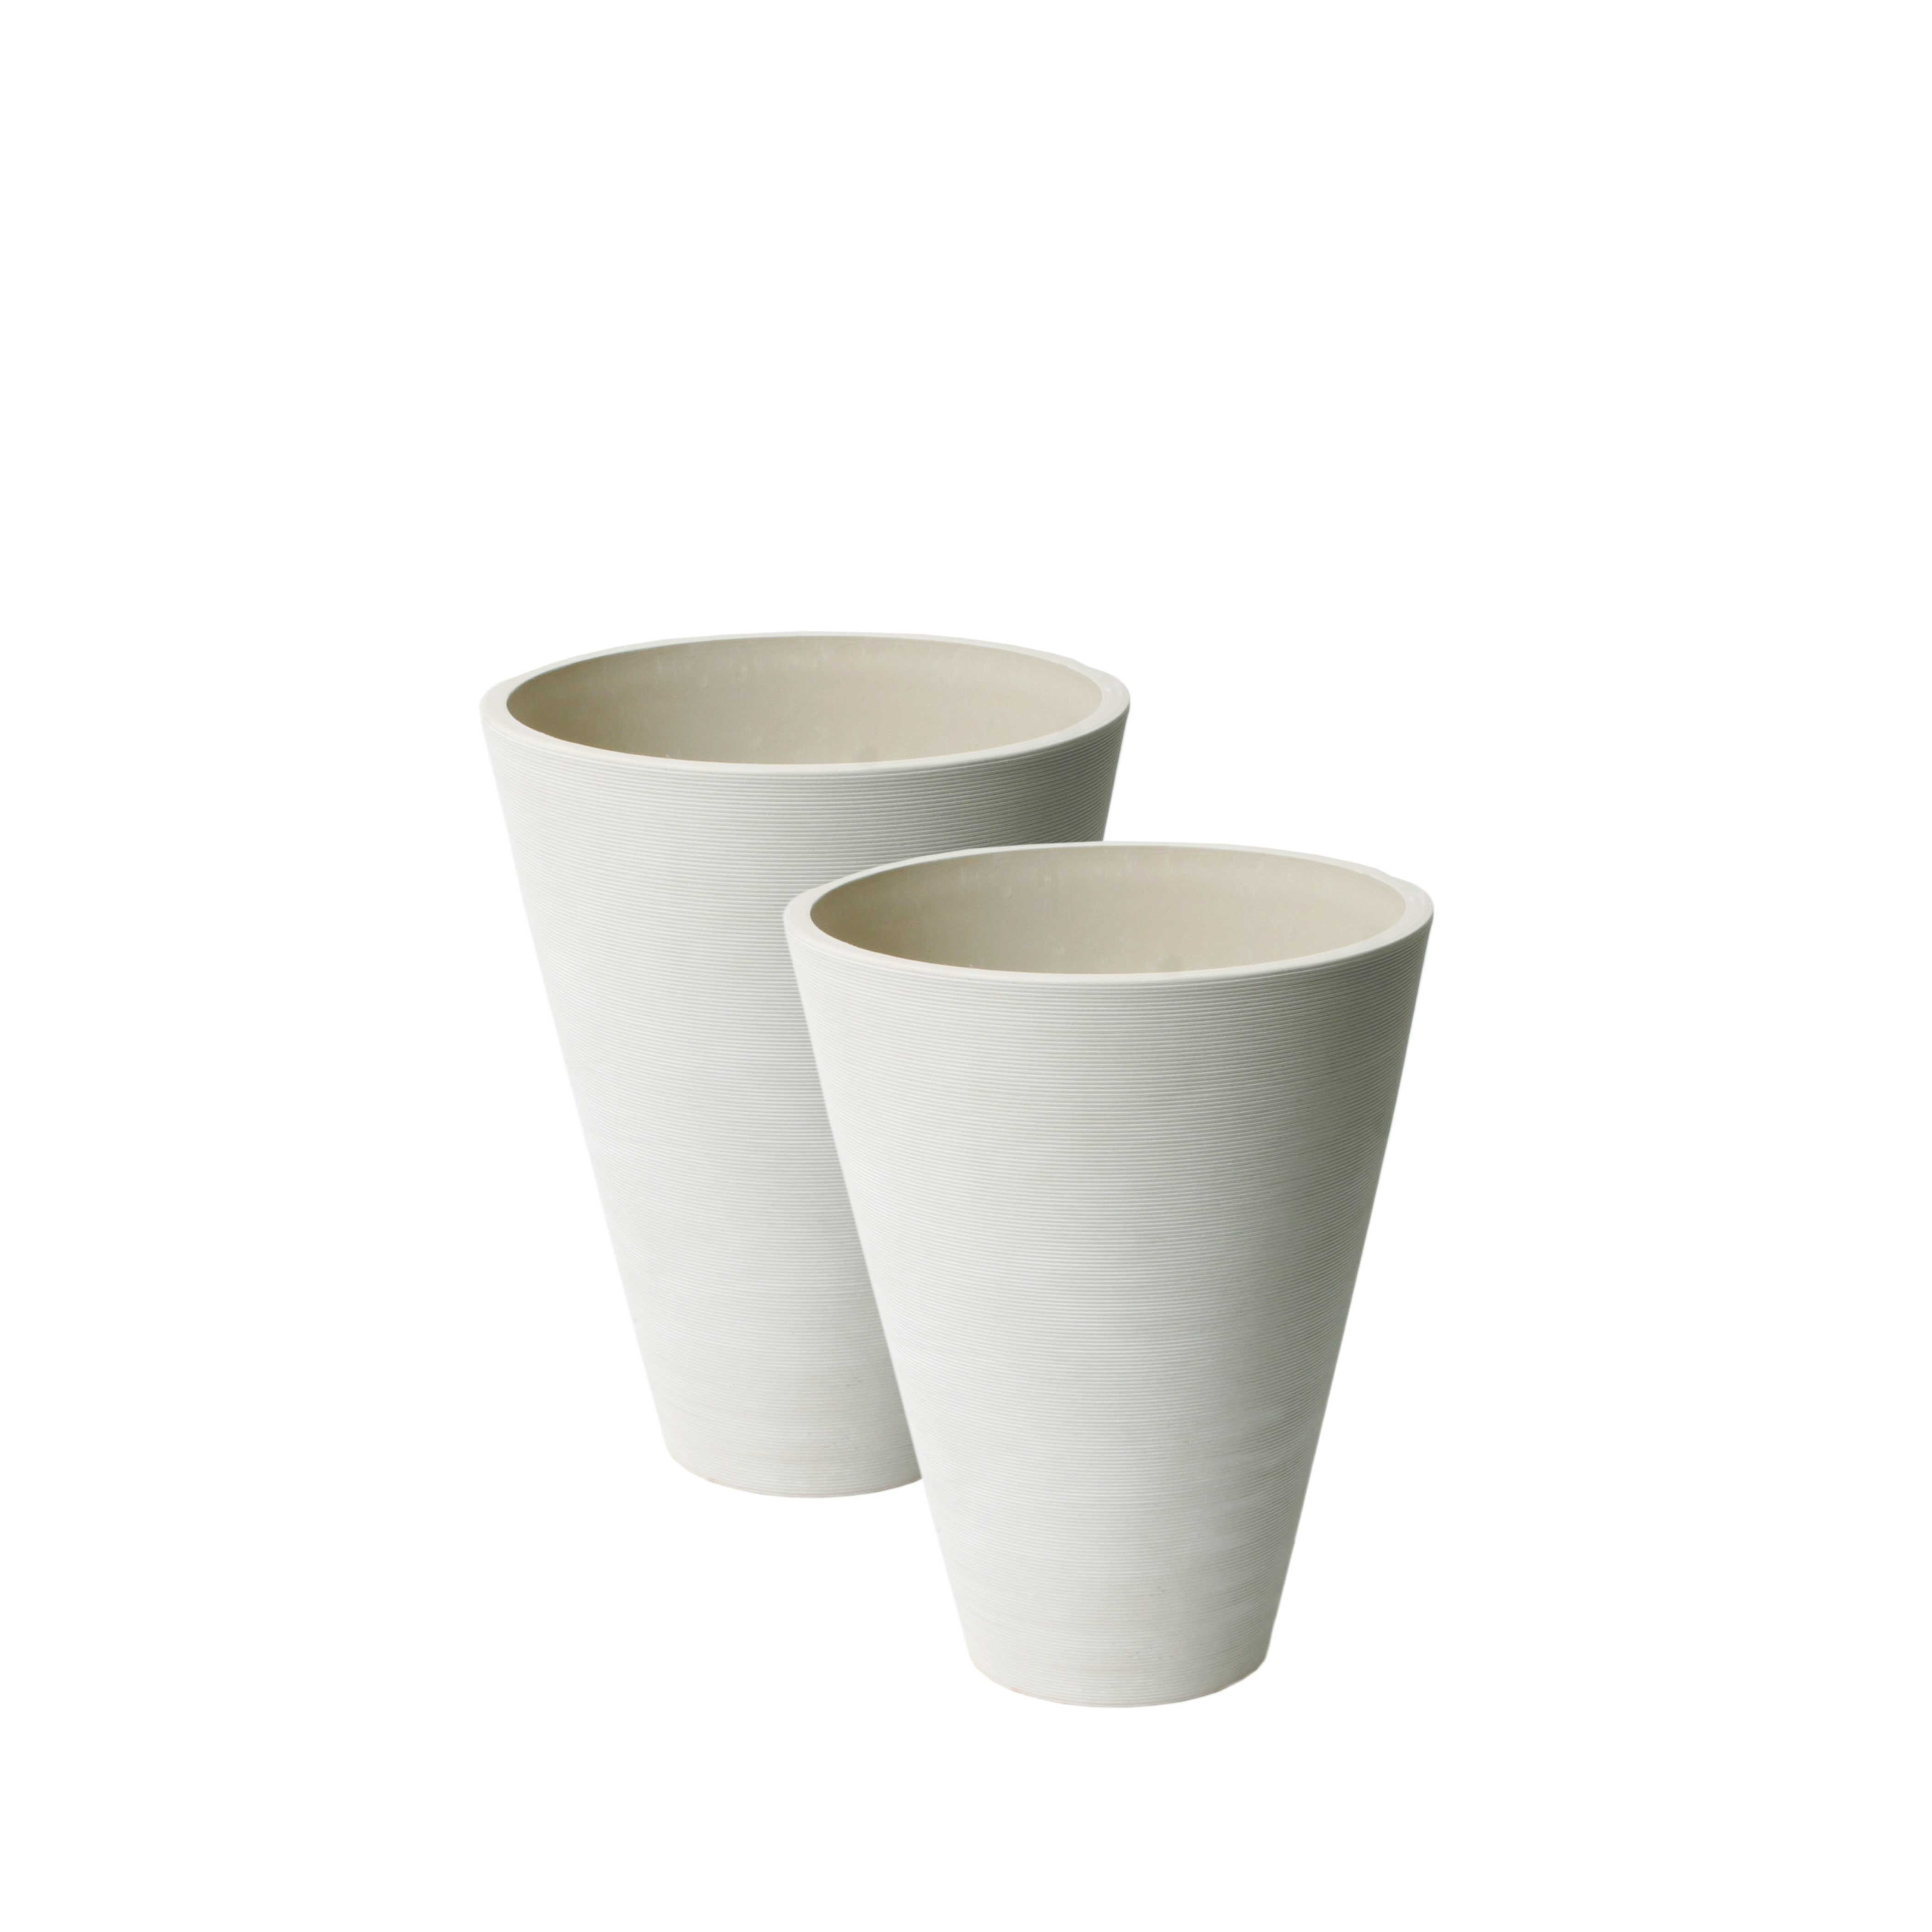 16428 Valencia 11.4 In. Dia. By 14 In. 2 Round Taper Ribbed Planters, White - Pack Of 2